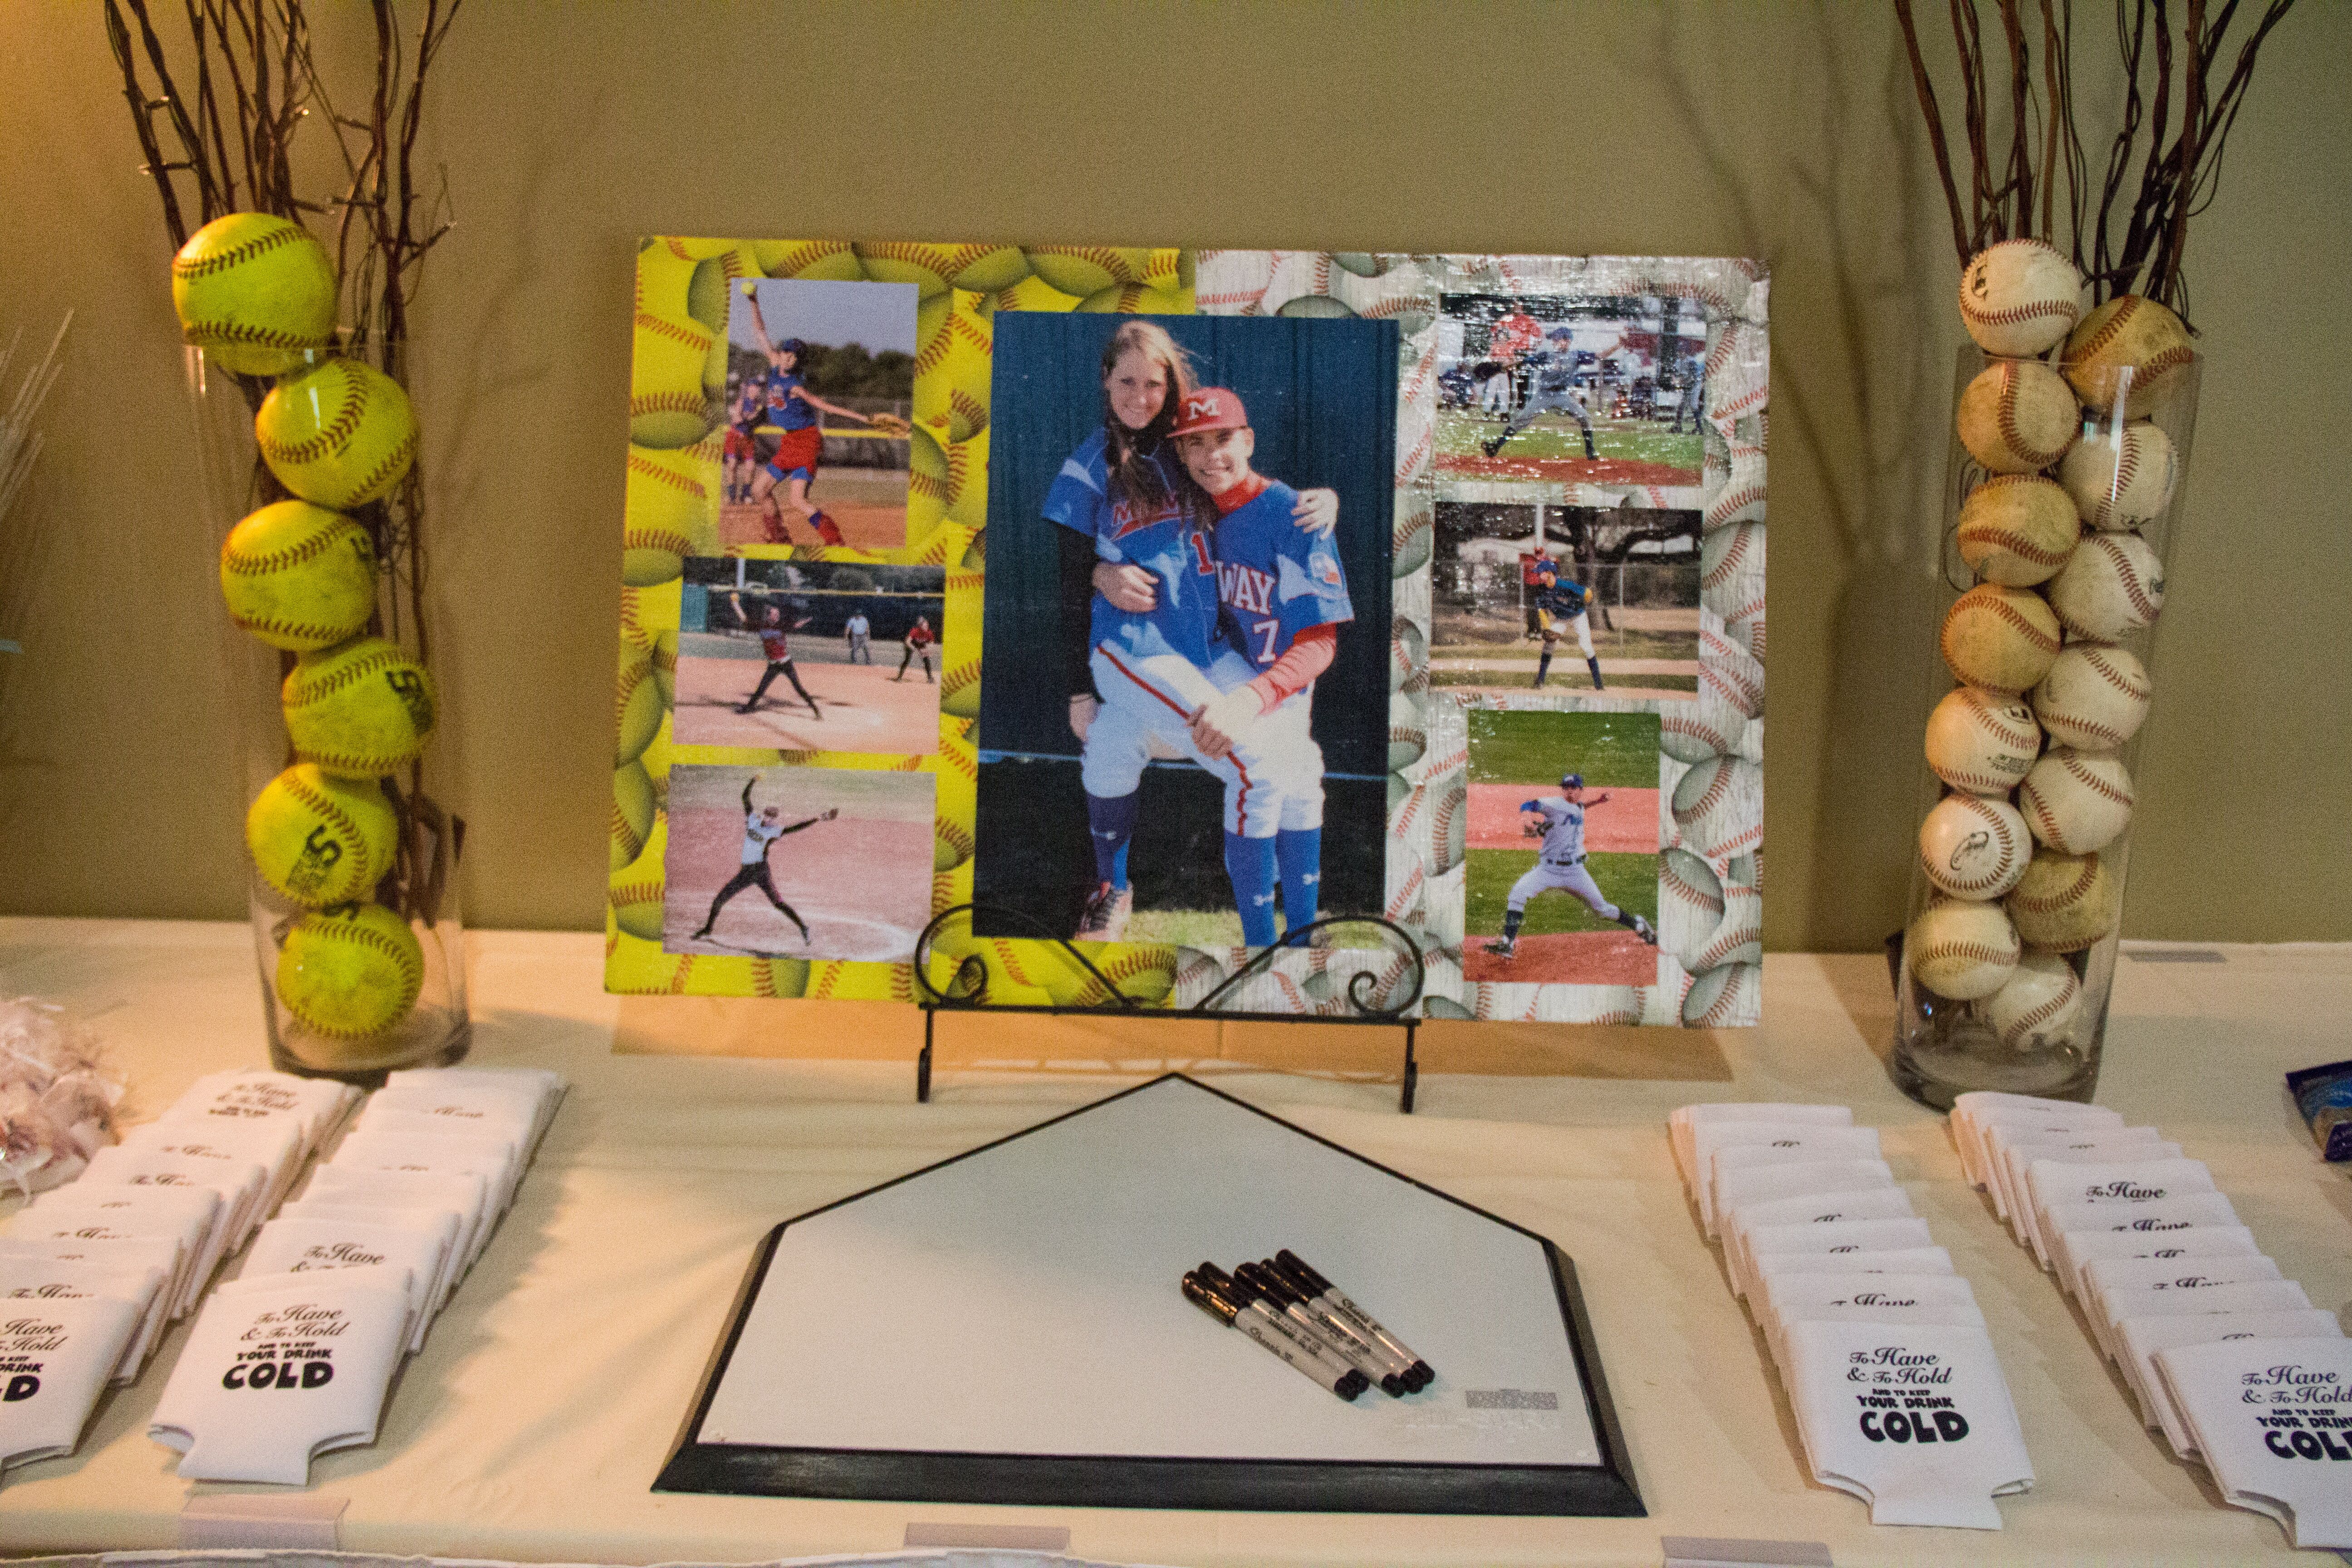 Baseball-Themed Home Plate Guest Book5184 x 3456